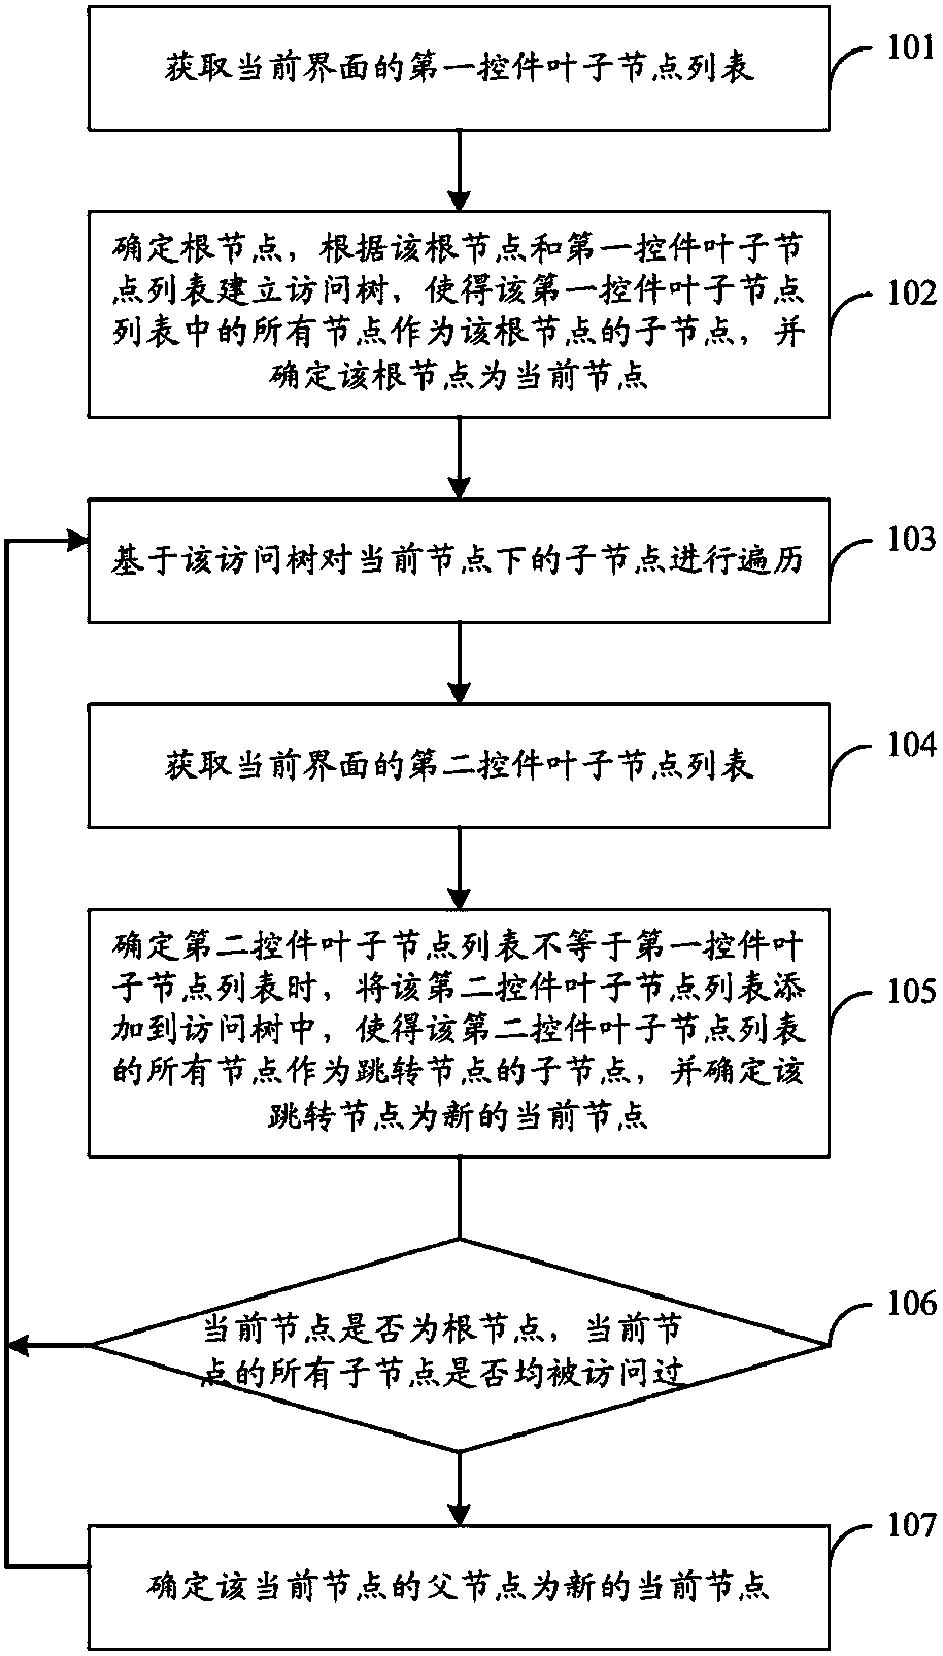 Application interface control traversal test method and application interface control traversal test devices